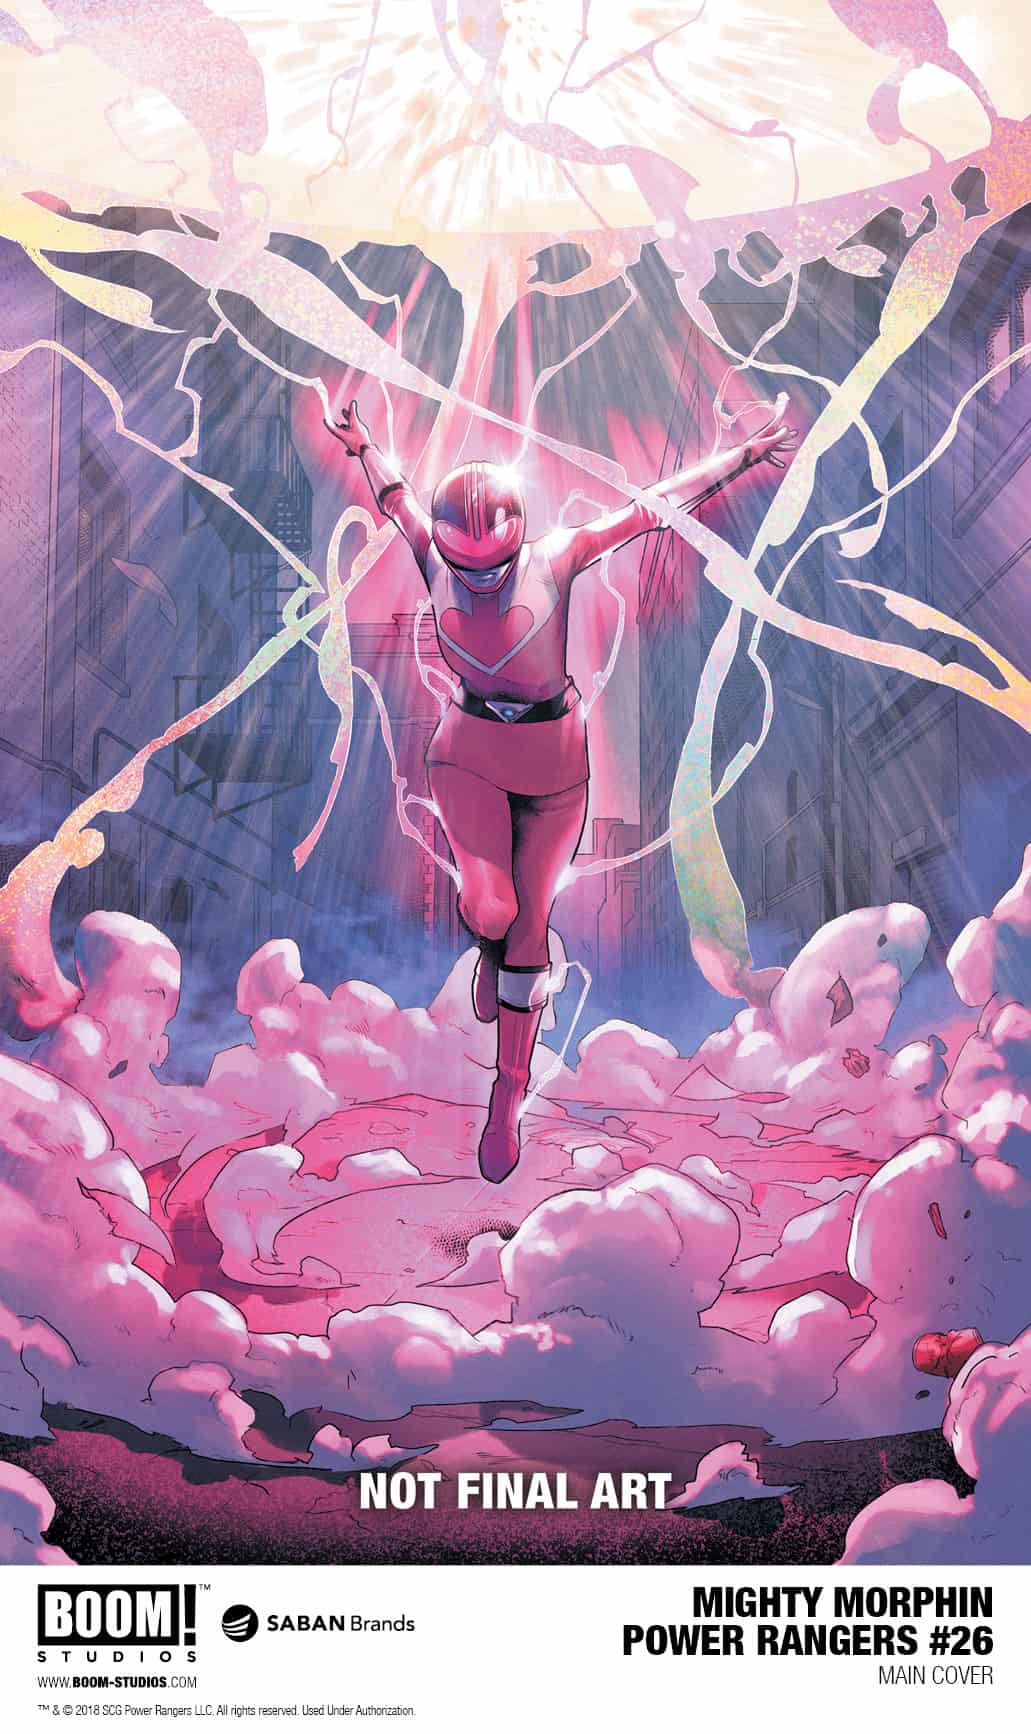 Mighty Morphin Power Rangers #26 main cover by Jamal Campbell